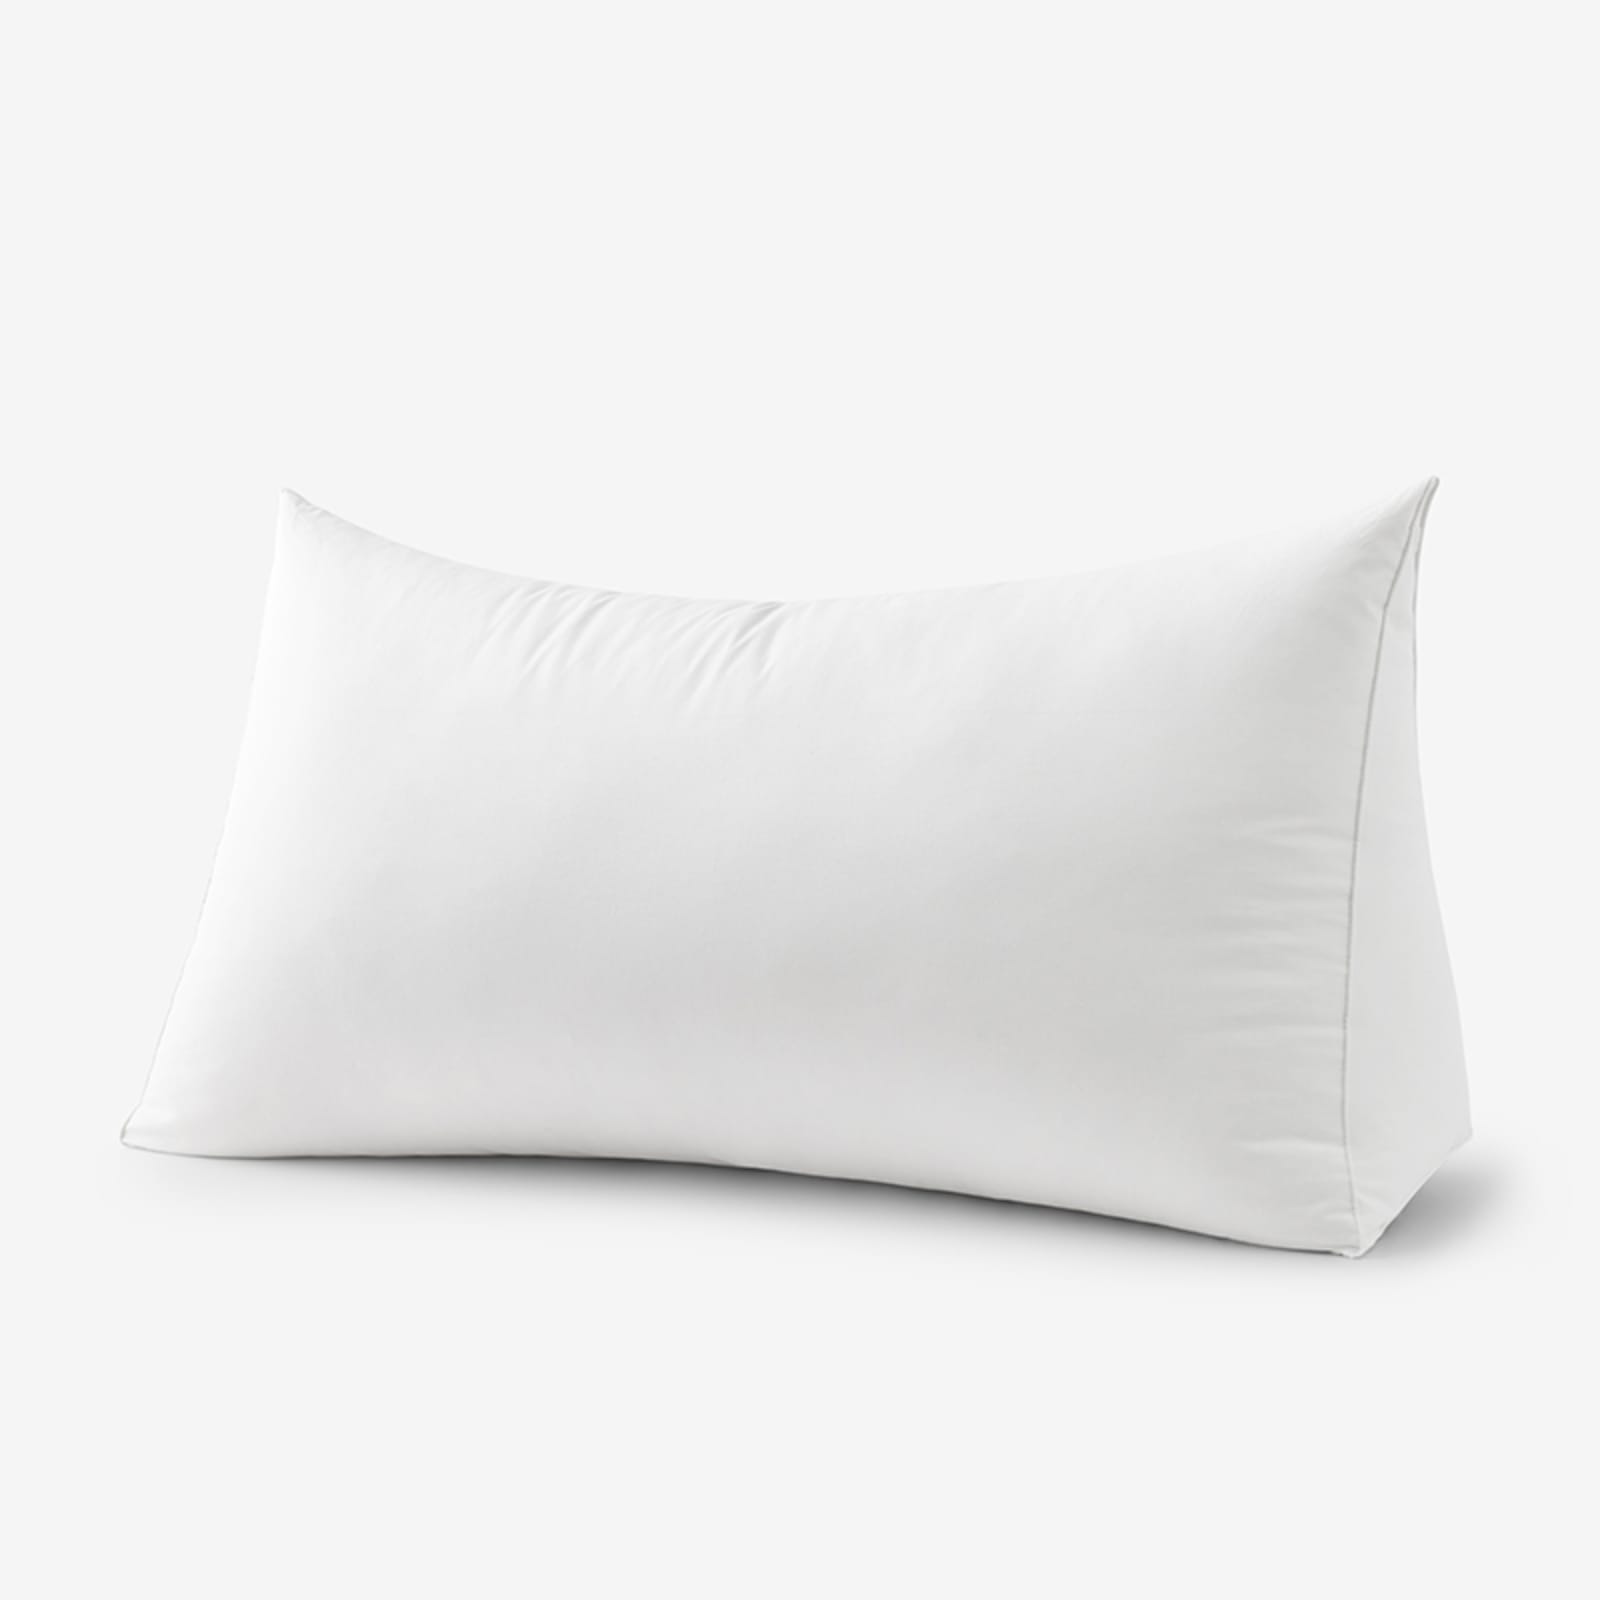 Feather and Down Neckroll Pillow Insert - White, Size 6 in. x 15 in., Cotton | The Company Store